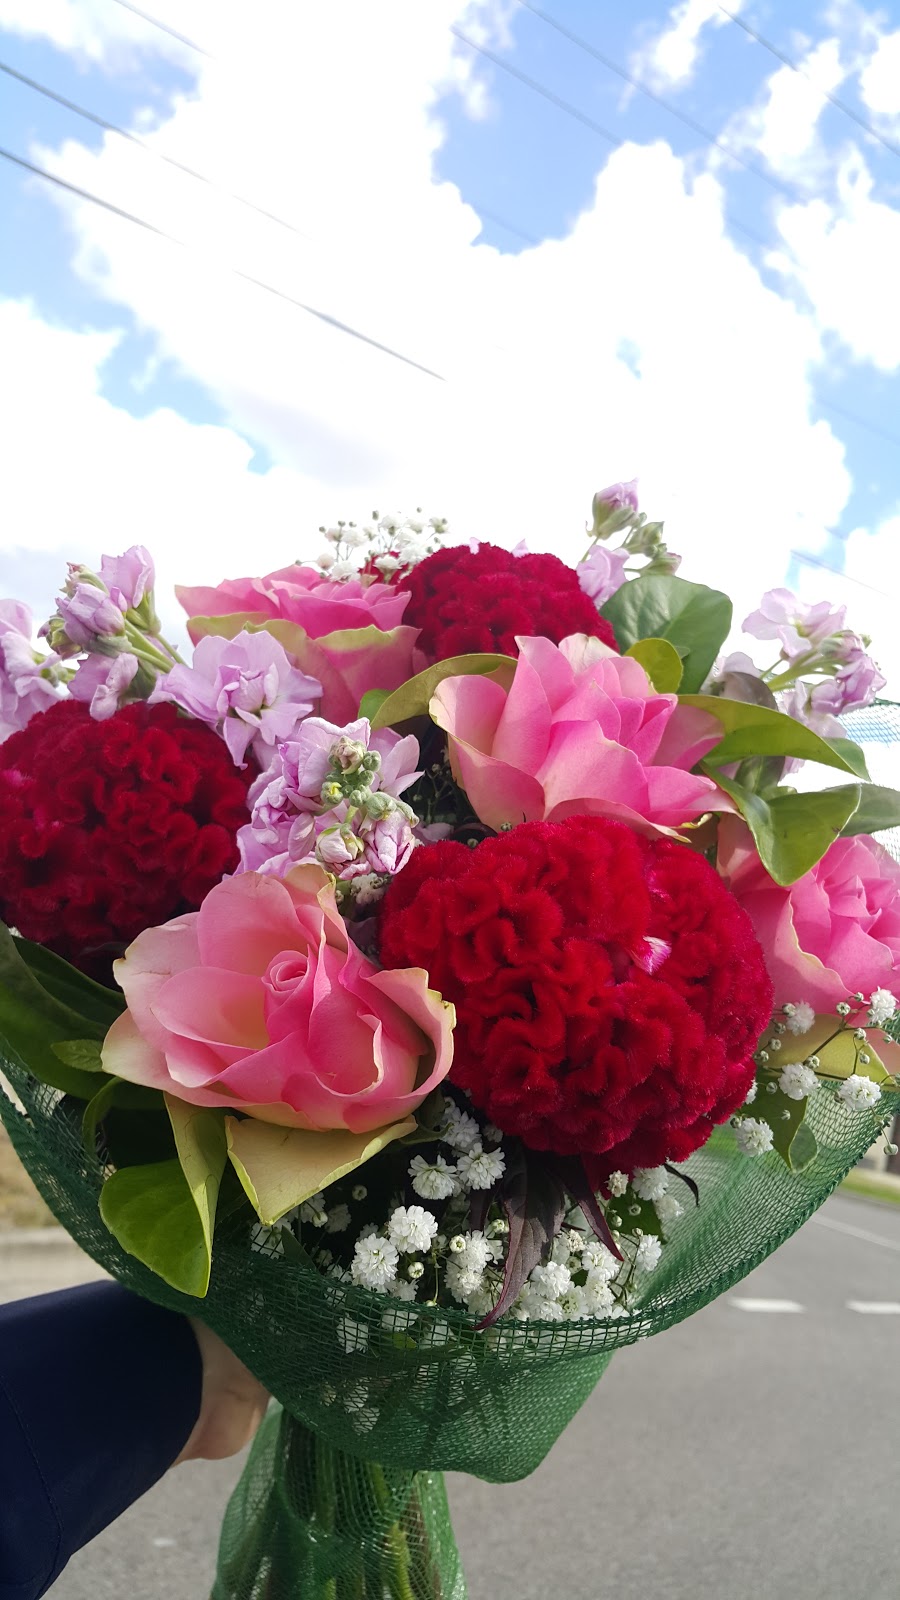 Angies For Flowers | florist | 78 Bickley Ave, Thomastown VIC 3074, Australia | 0421709437 OR +61 421 709 437